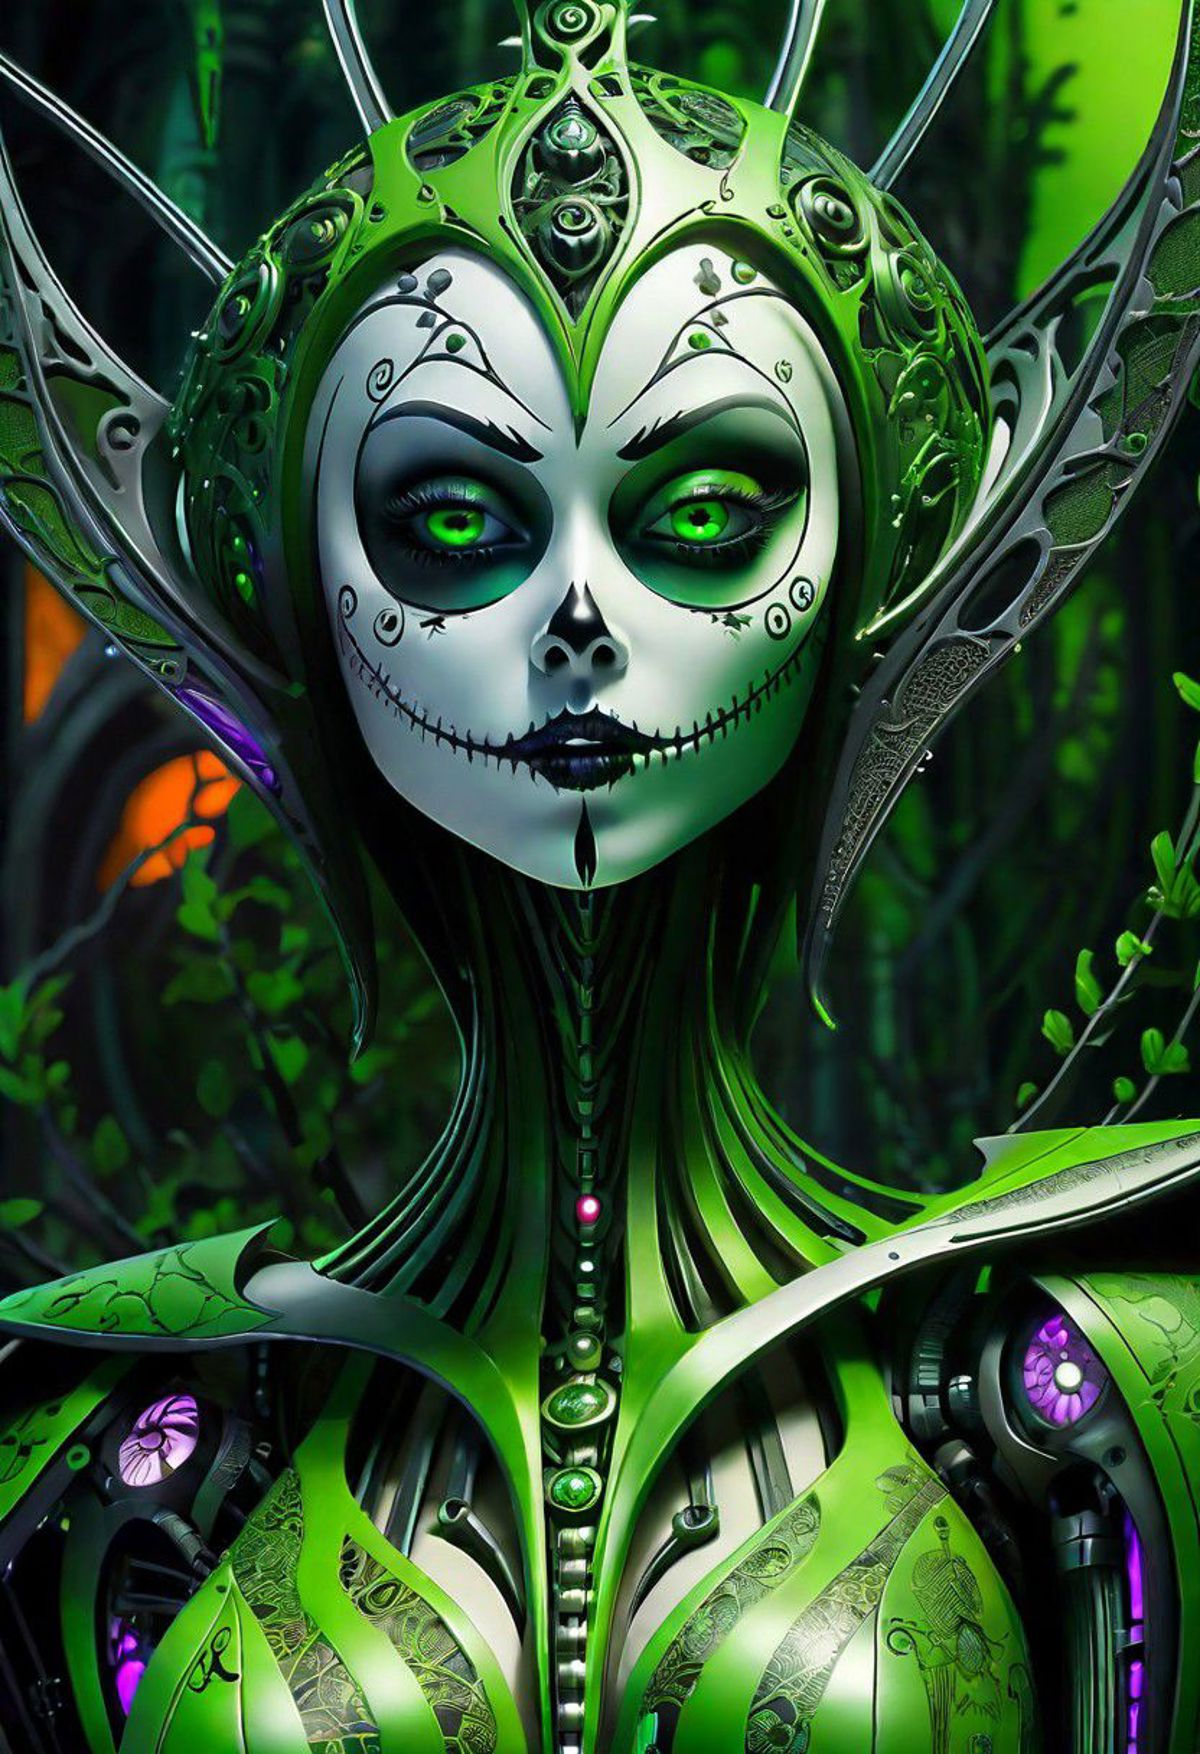 A Skeleton Lady with Green Makeup and Glowing Eyes.